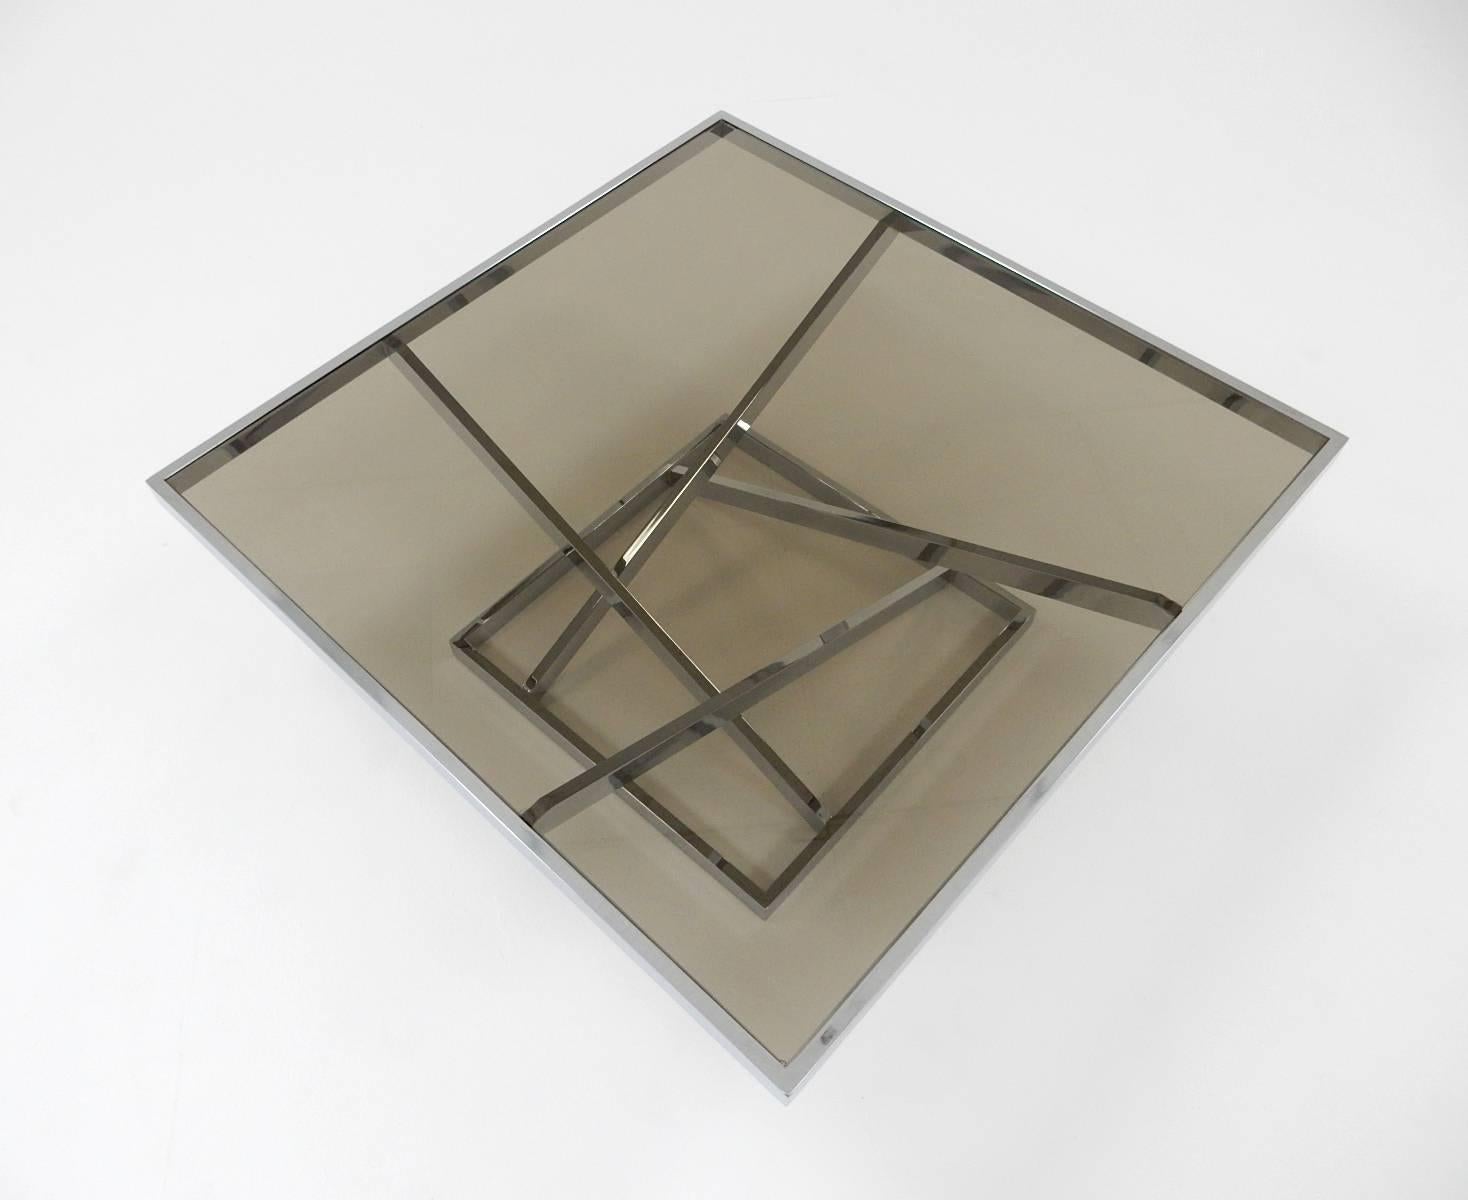 Large architectural design chrome flat bar steel coffee table with smoke glass top by Design Institute of American in the style of Milo Baughman,
circa 1970s. This table is solid and in excellent condition except for a chip in two corners of glass